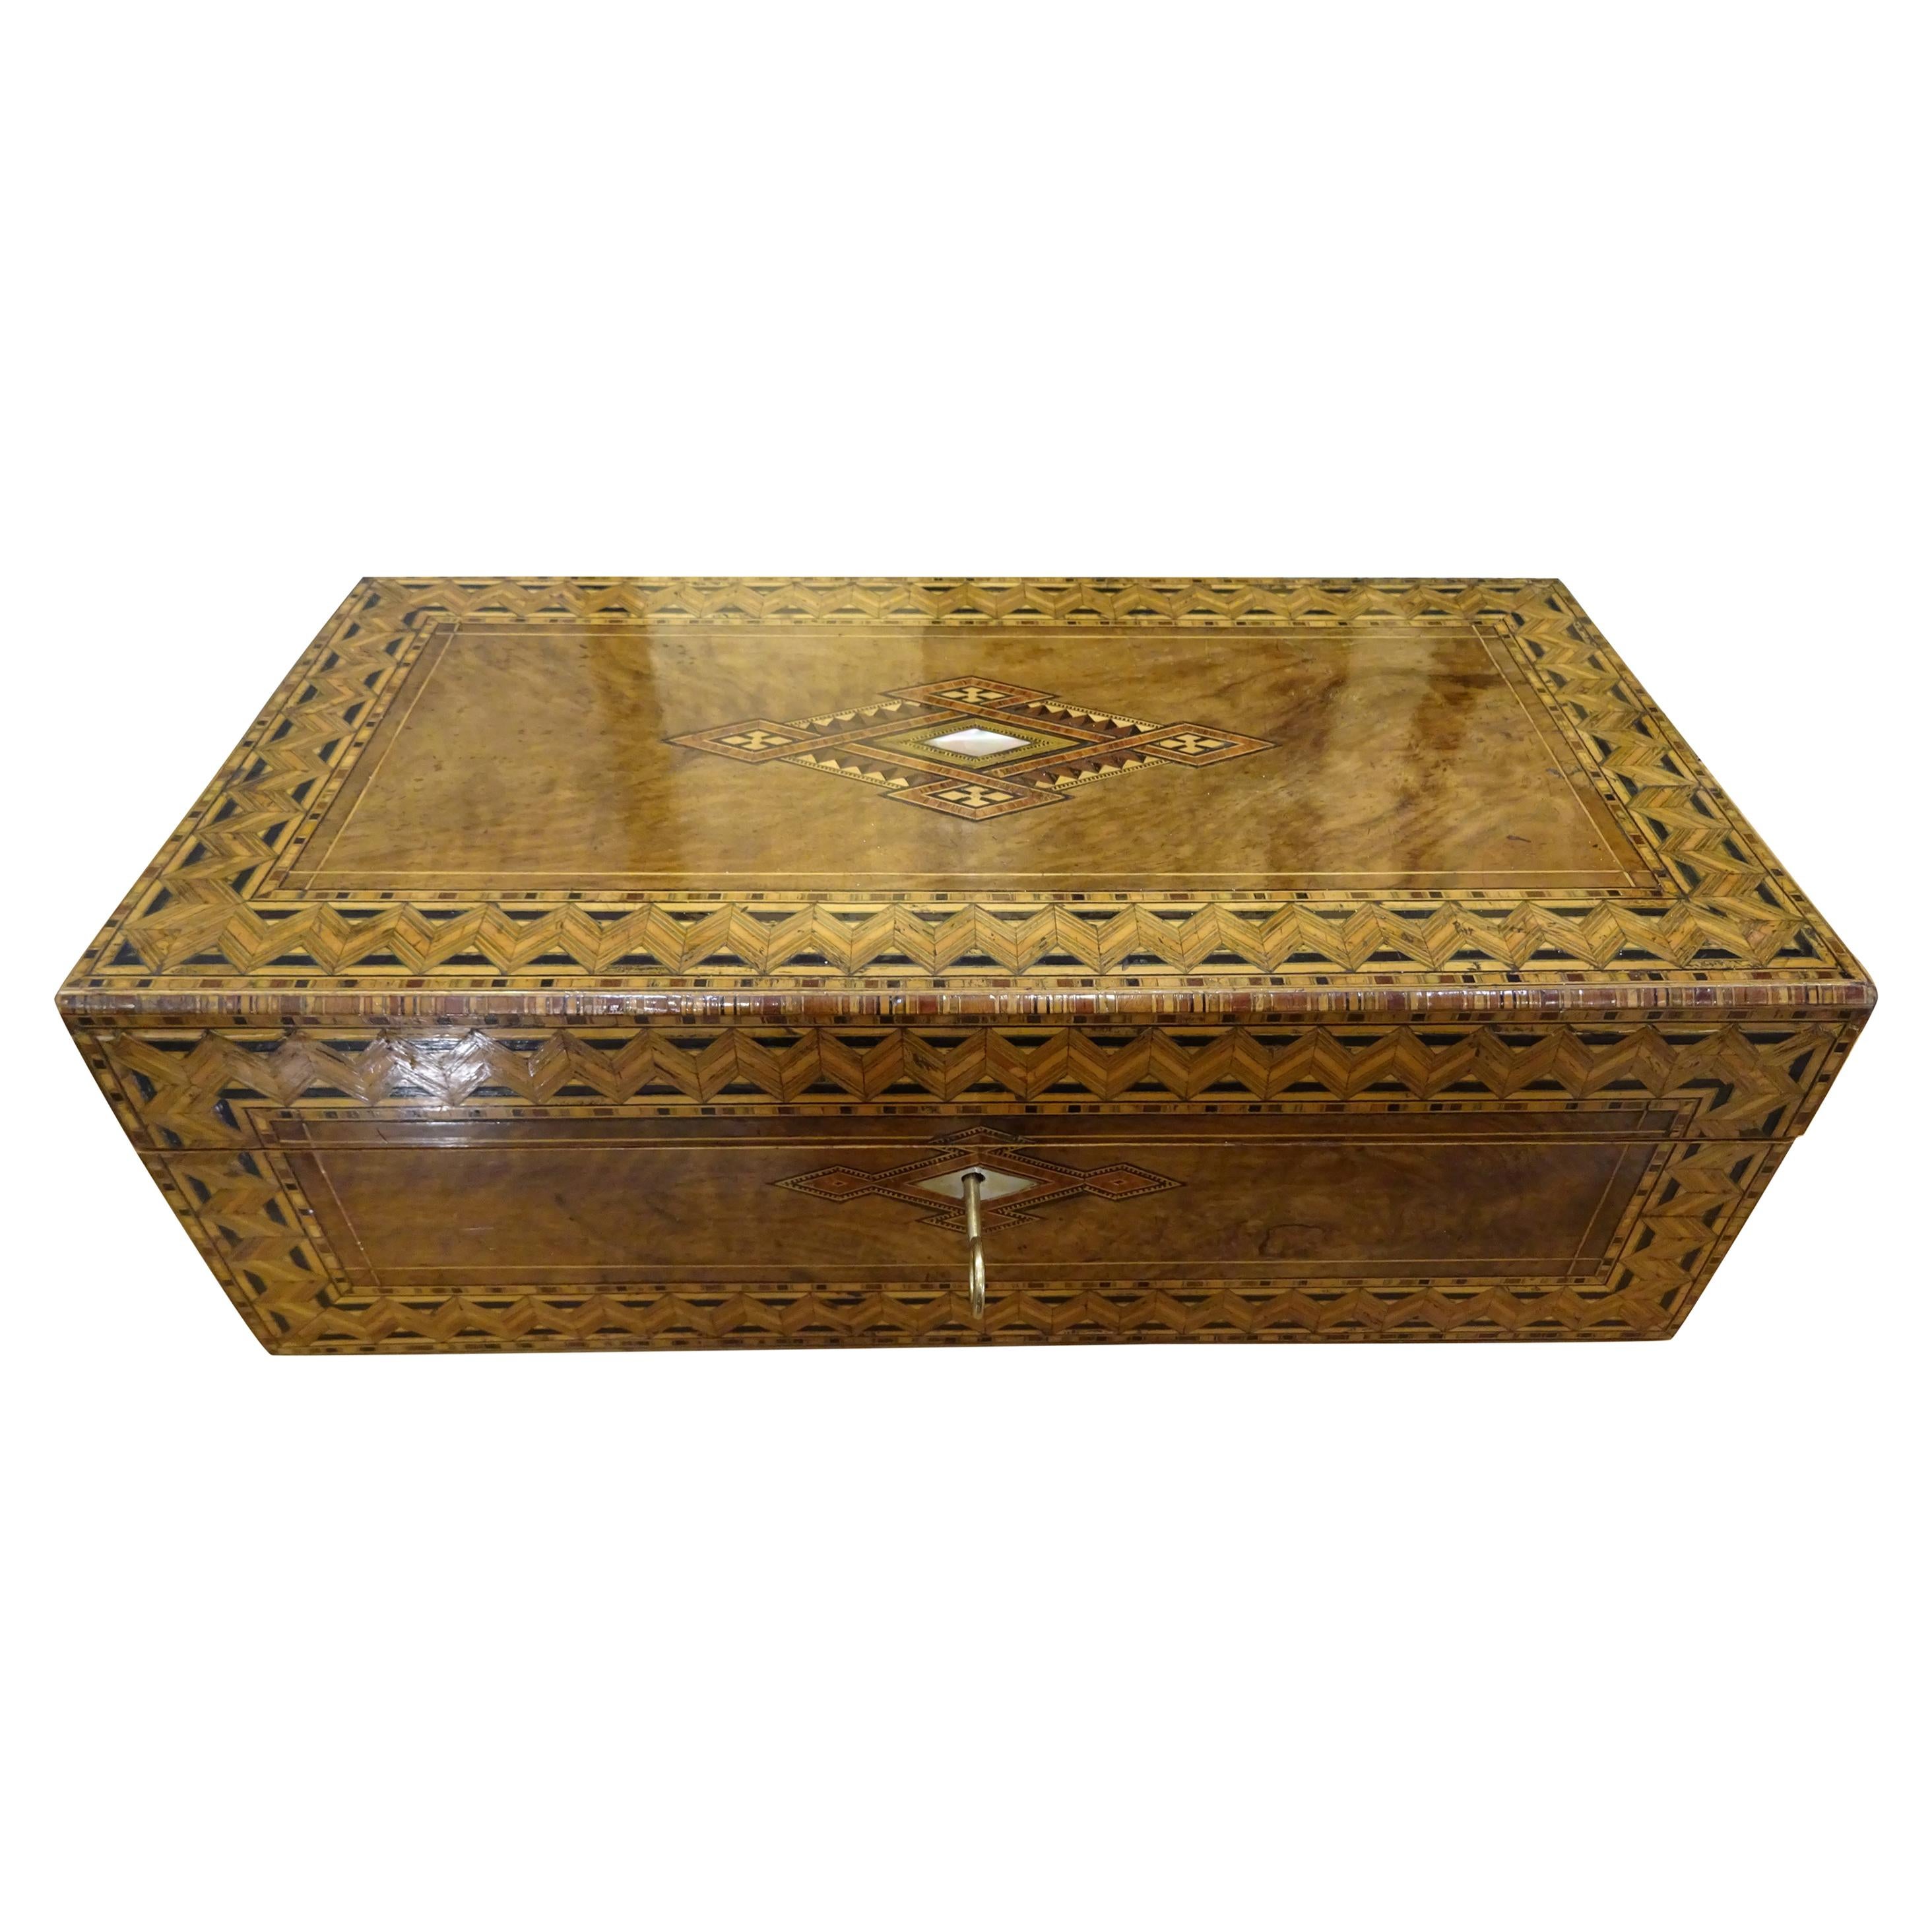 19th Century English Boat Desk-Box, Inlaid Wood and Mother of Pearl